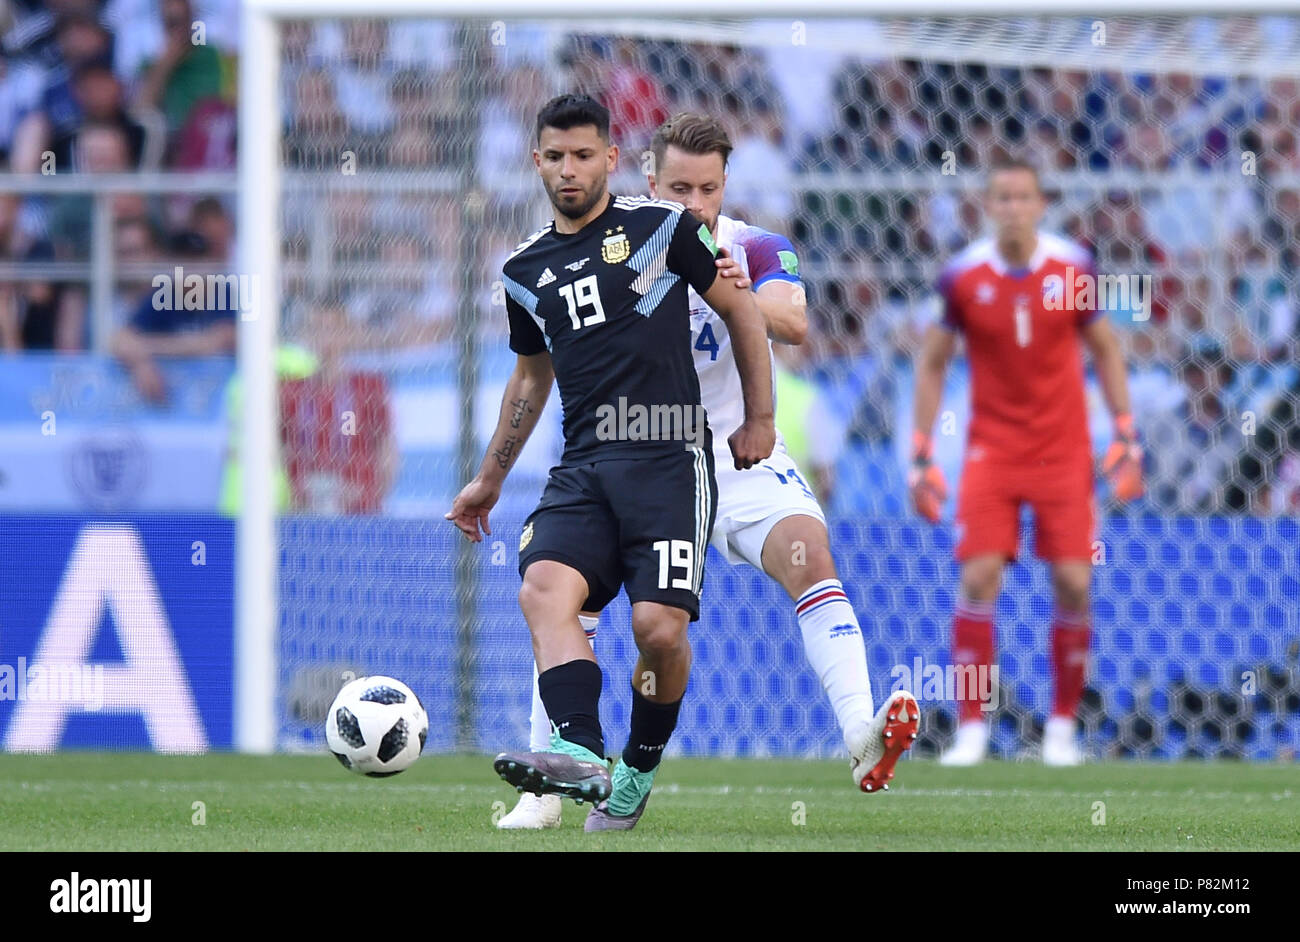 MOSCOW, RUSSIA - JUNE 16: Kari Arnason of Iceland competes with Sergio Aguero of Argentina during the 2018 FIFA World Cup Russia group D match between Argentina and Iceland at Spartak Stadium on June 16, 2018 in Moscow, Russia. (Photo by Lukasz Laskowski/PressFocus/MB Media) Stock Photo